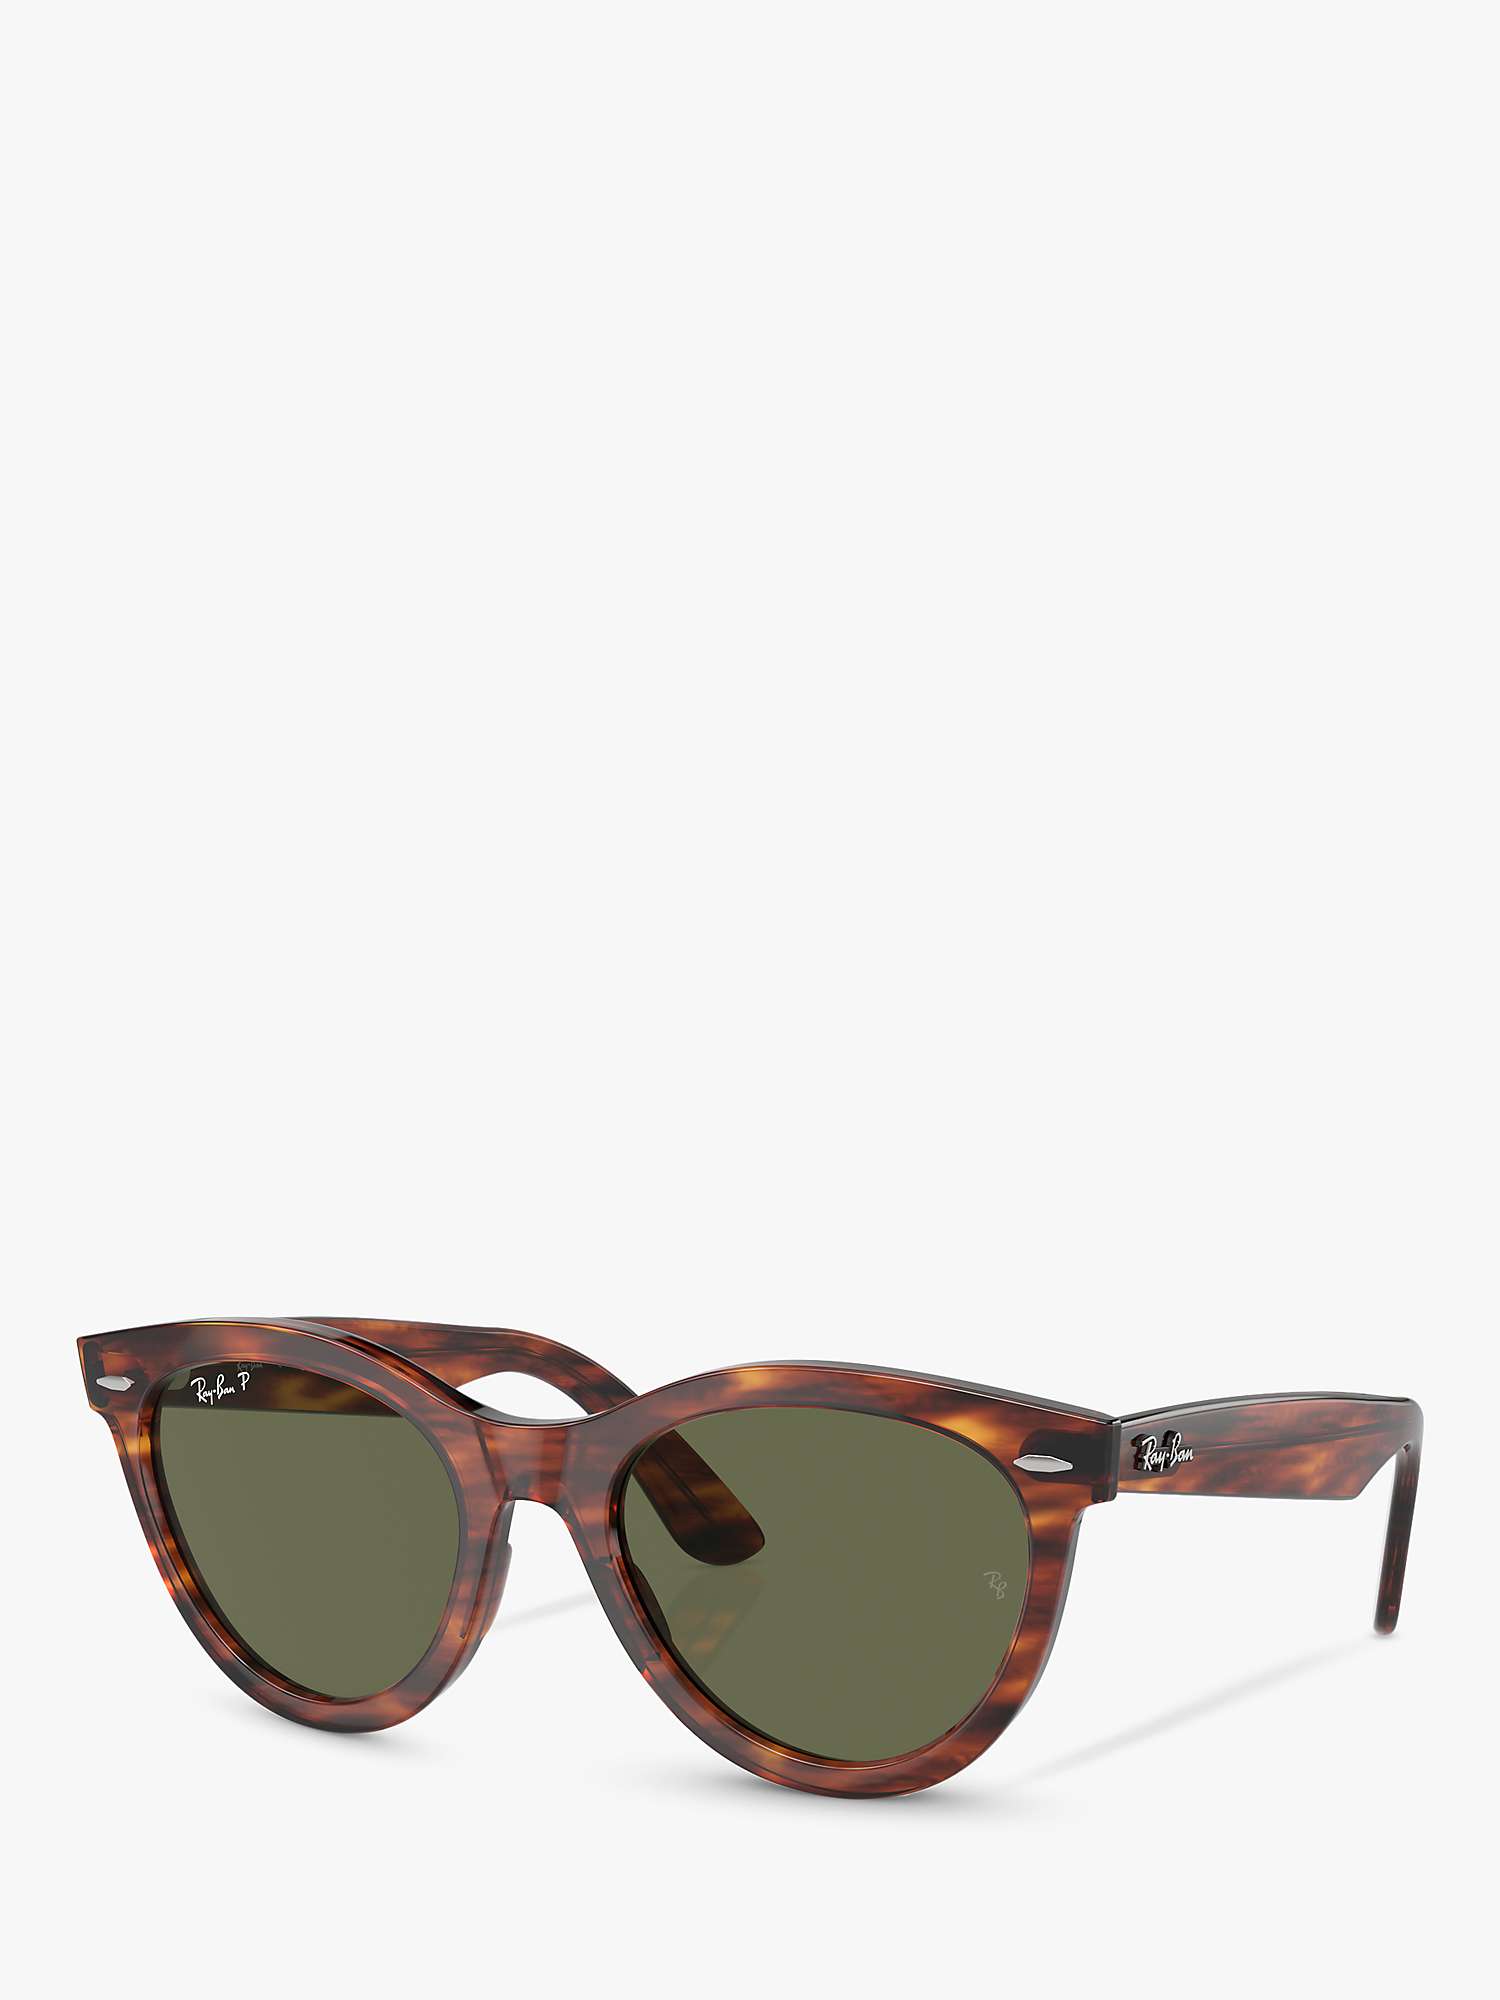 Buy Ray-Ban RB2241 Unisex Polarised Oval Sunglasses, Striped Havana/Green Online at johnlewis.com